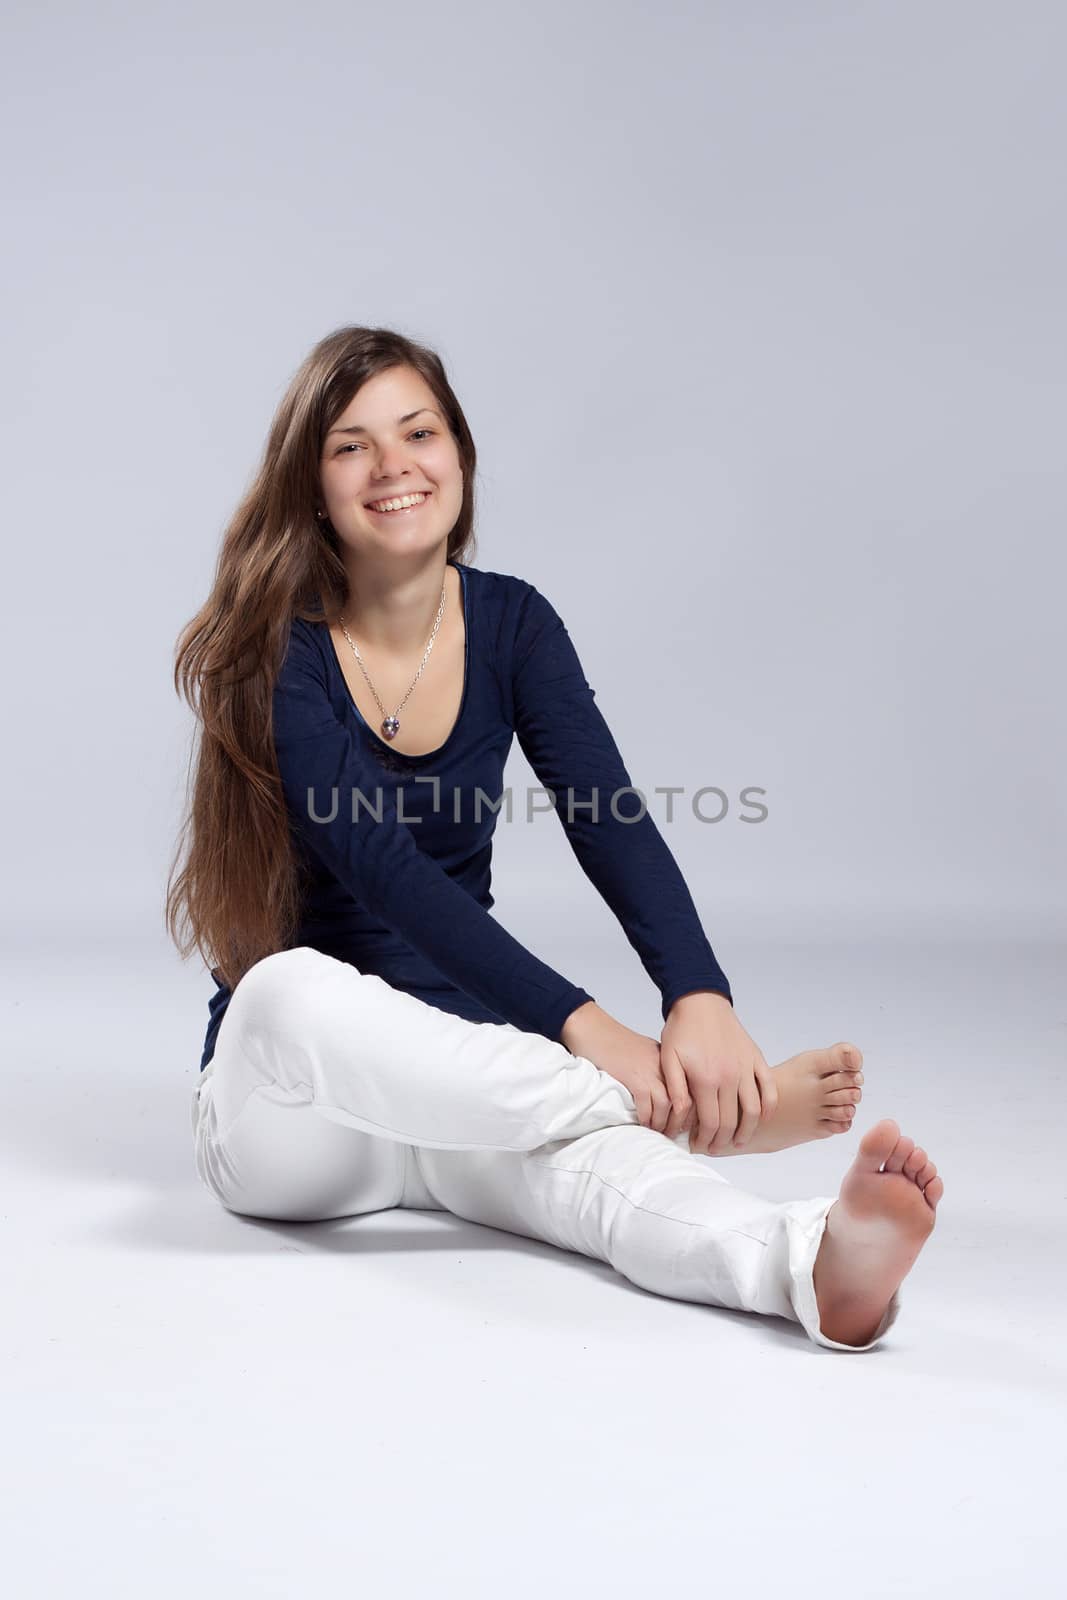 Young long-haired woman without makeup in white jeans and a blue shirt sitting on the floor and laughing